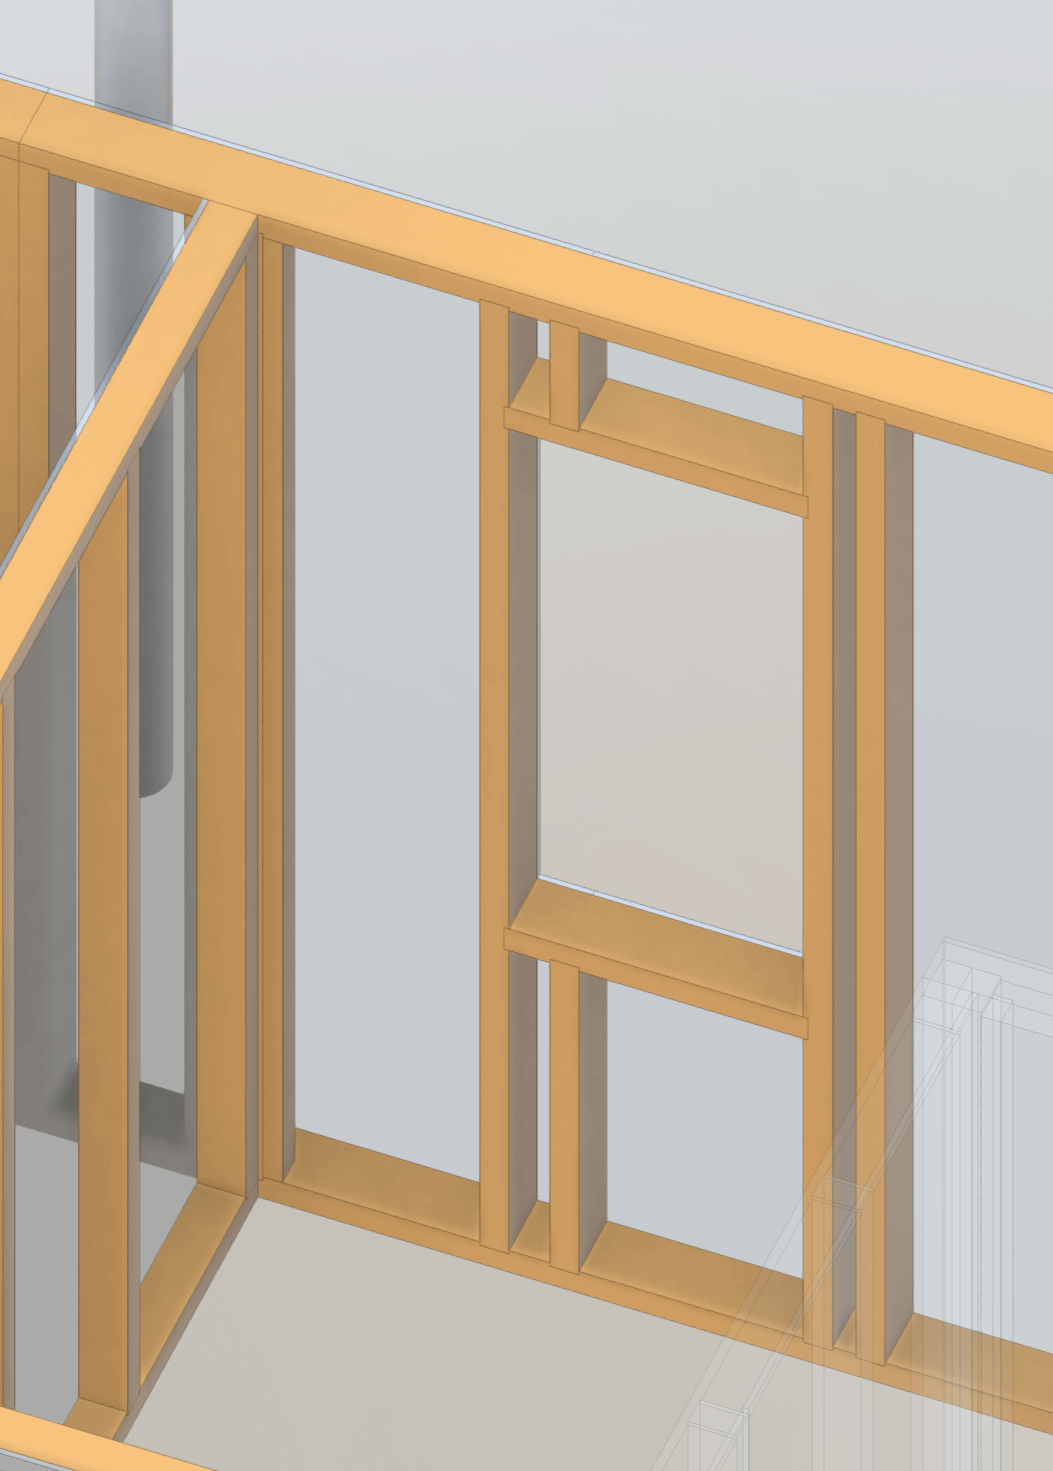 wood framed walls intersection and window opening